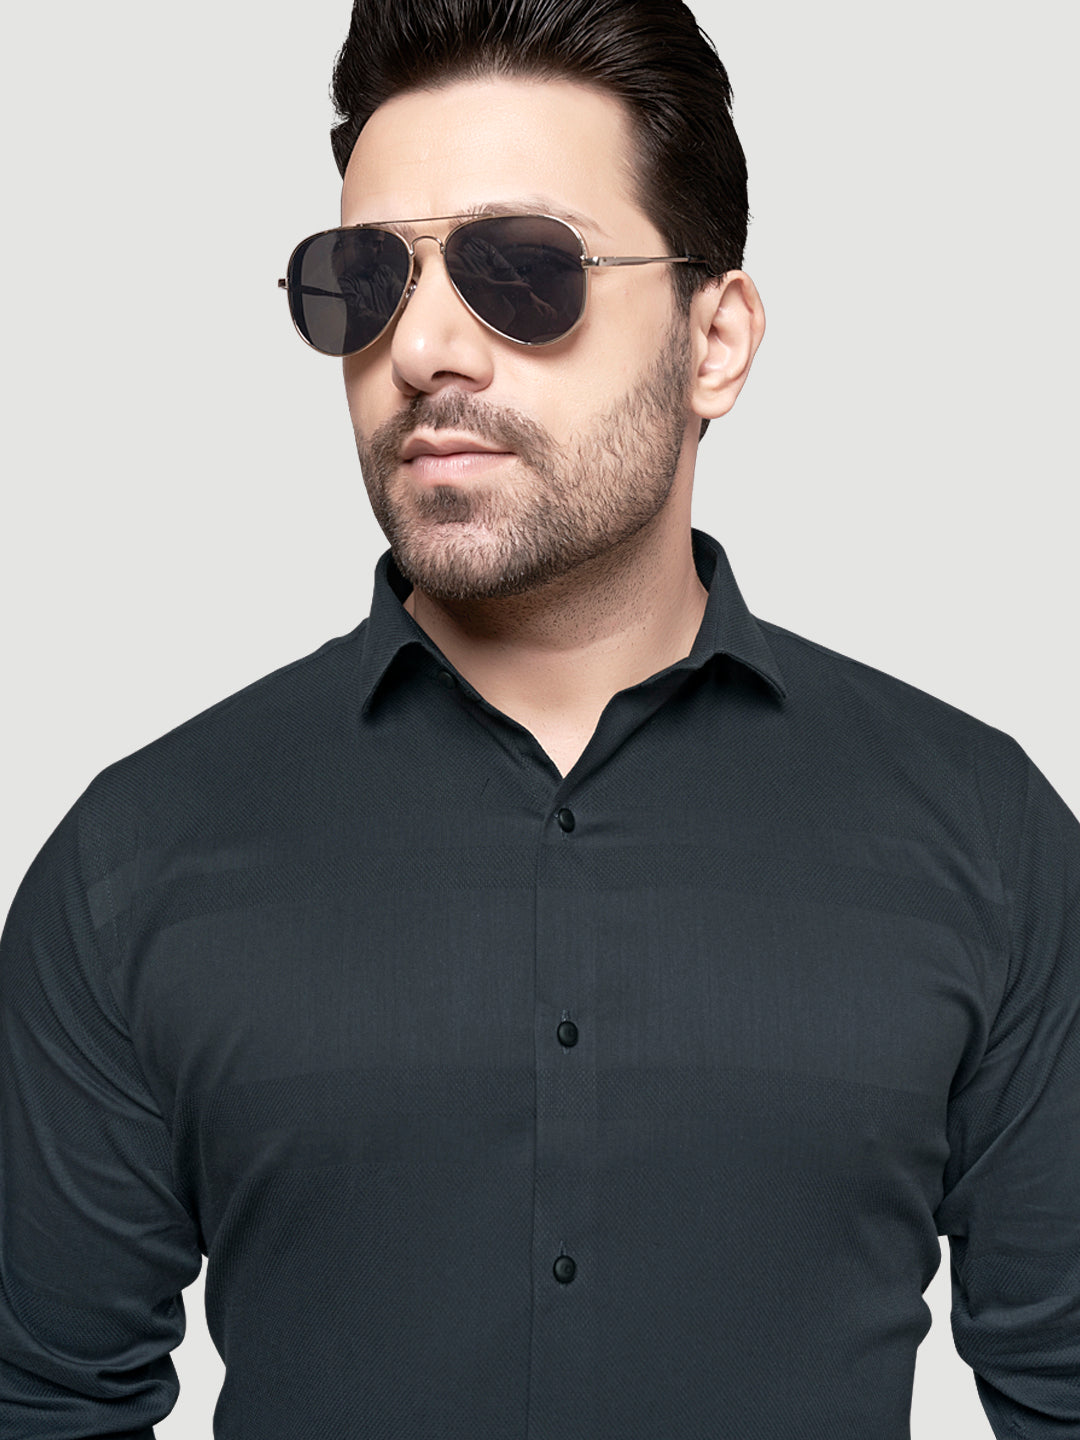 Black and White Men's Designer Shirt with Collar Accessory & Broach 5